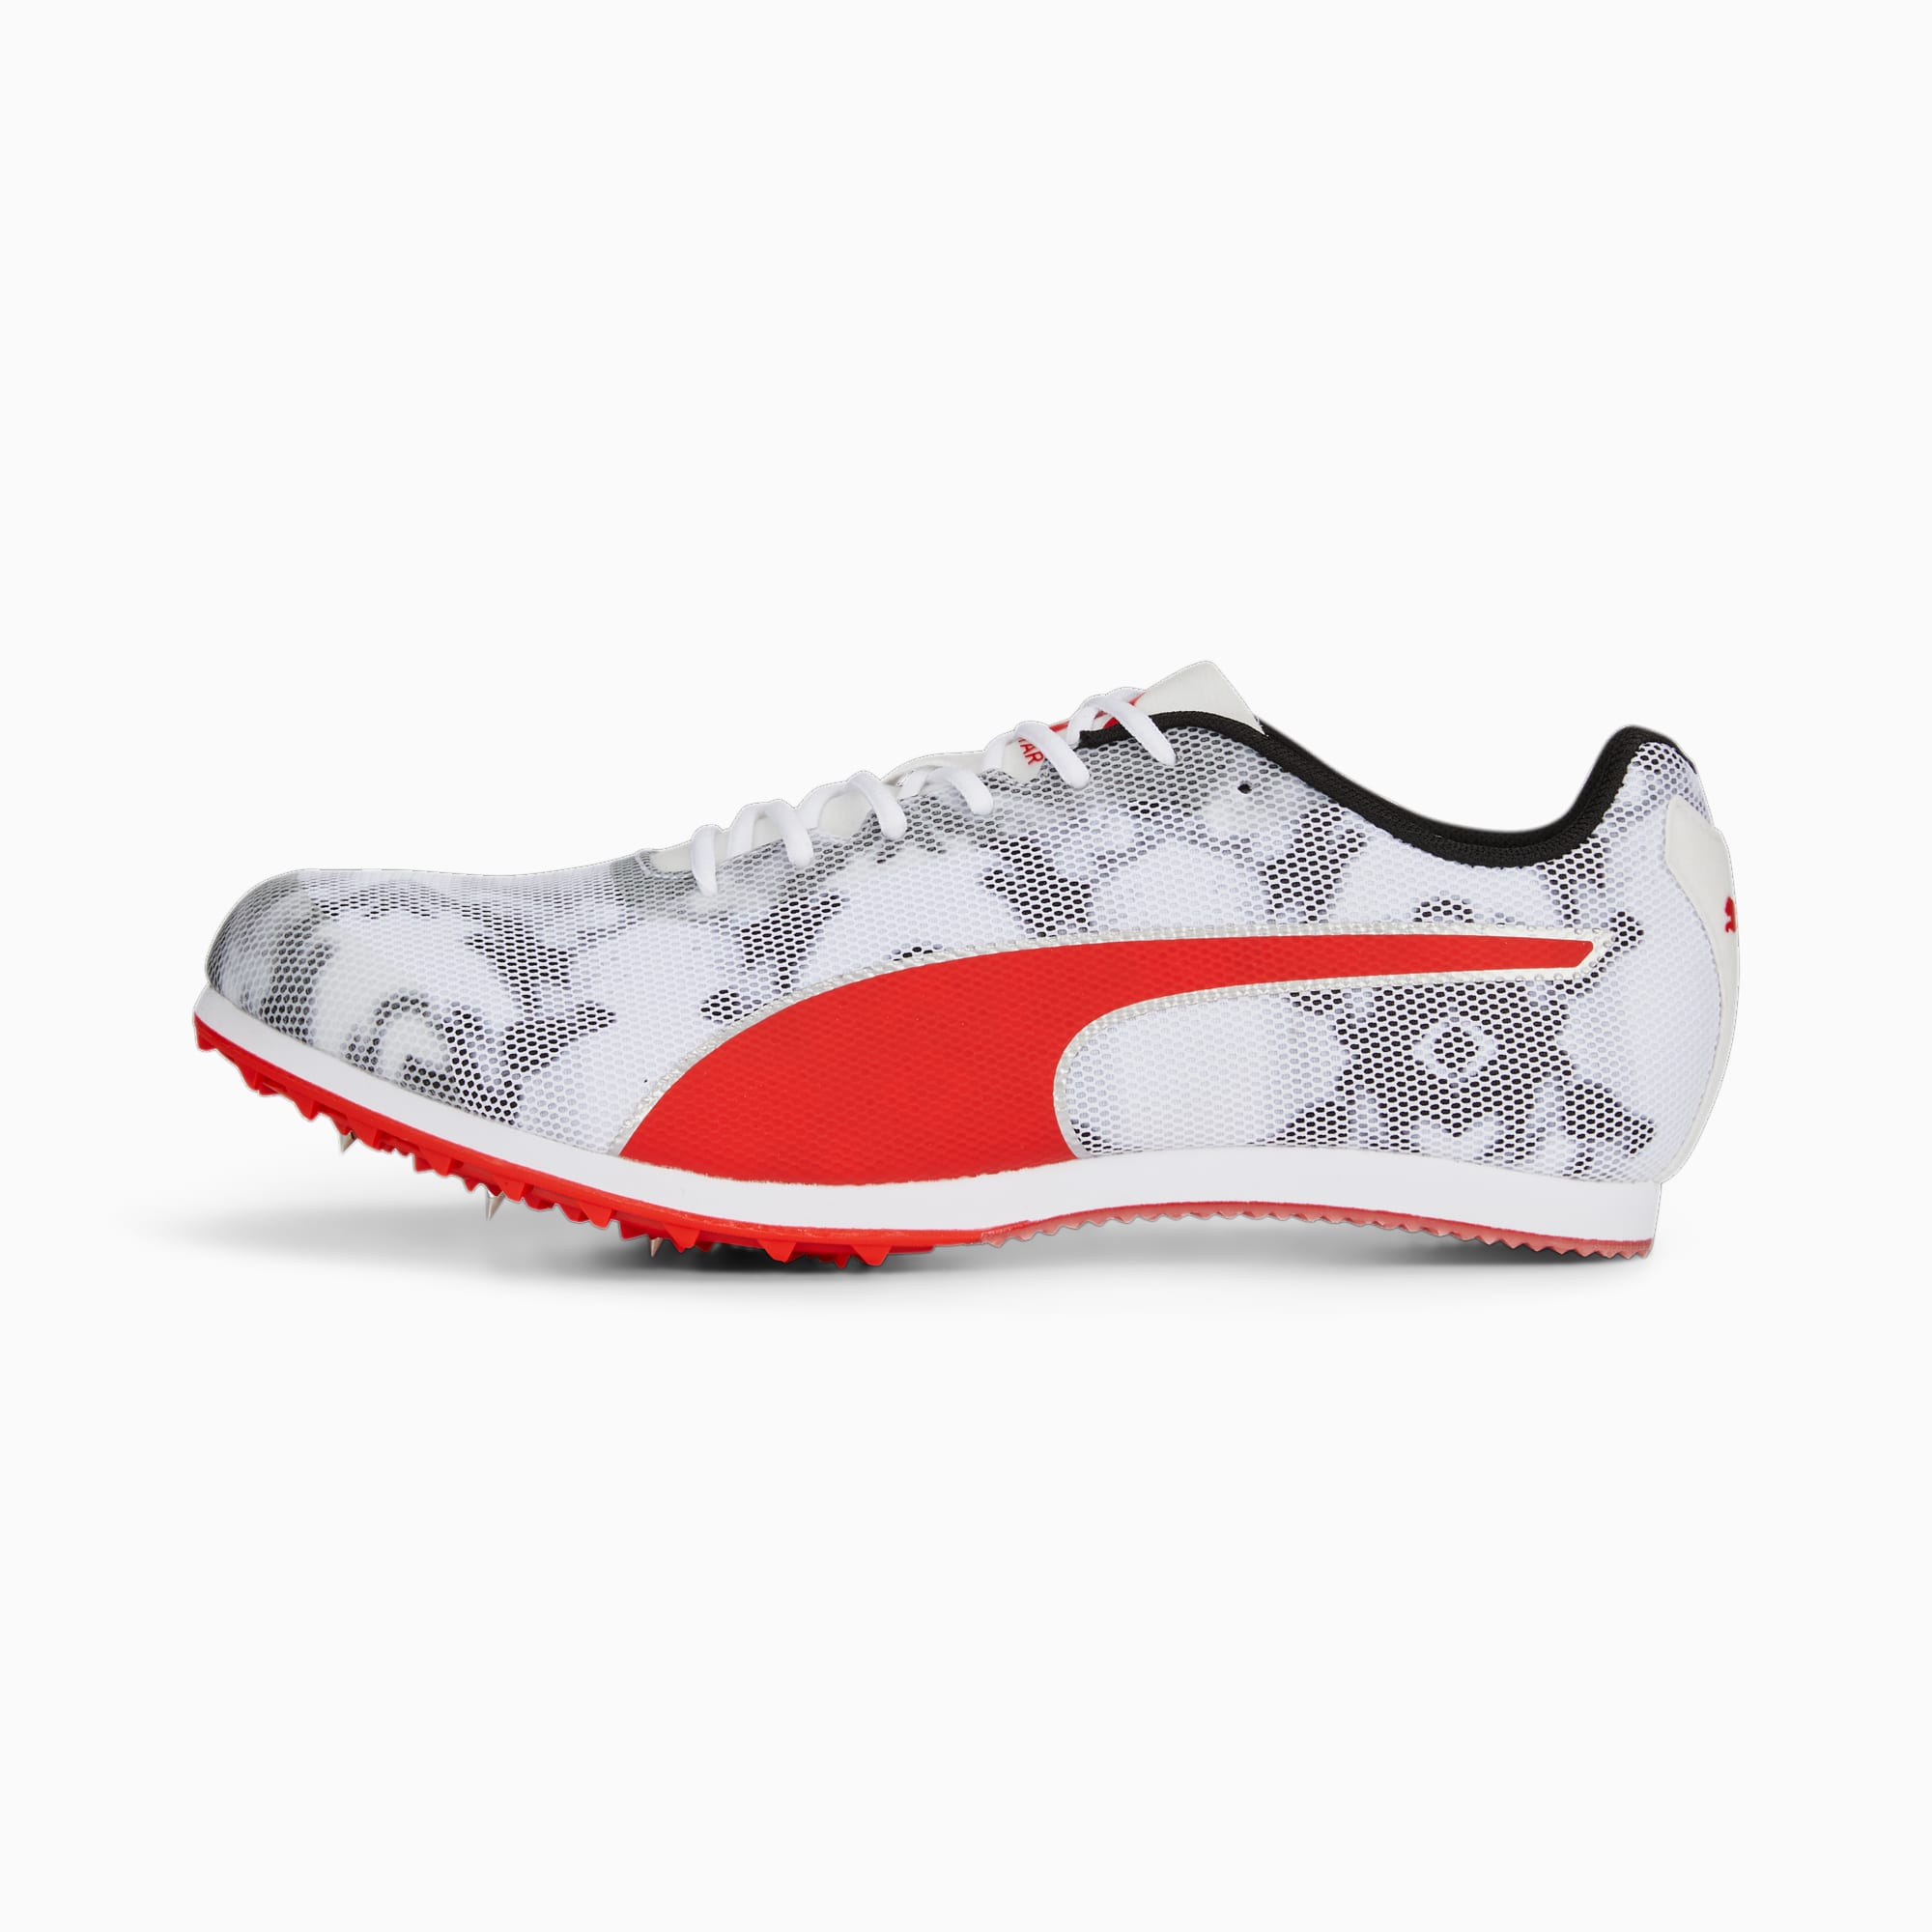 Women's PUMA Evospeed Star 8 Track And Field Shoes, Black/White/Red